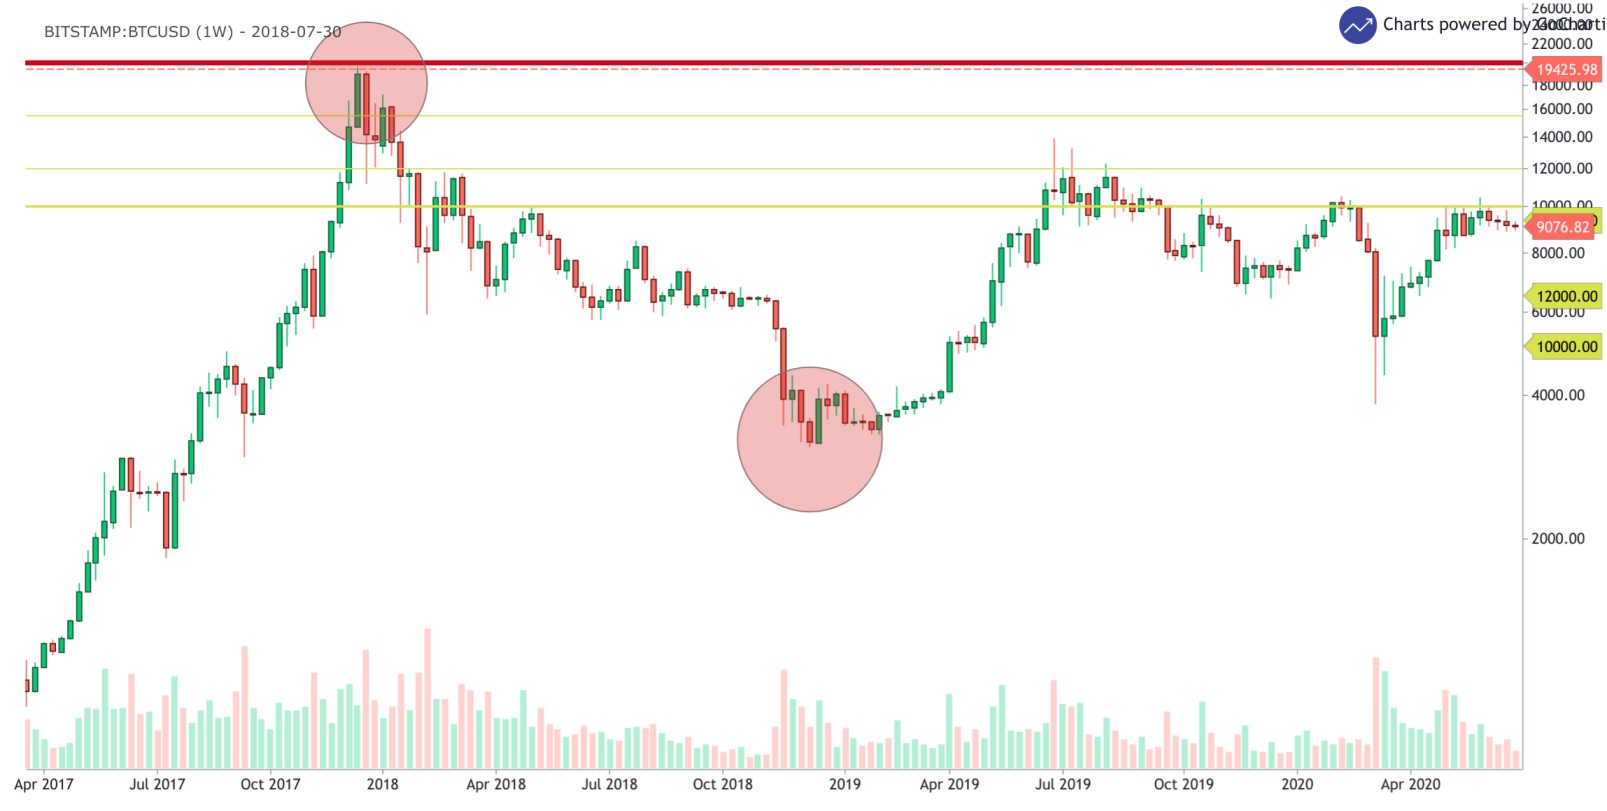 BTC/USD 1-week chart showing the crash of BTC back in 2018 